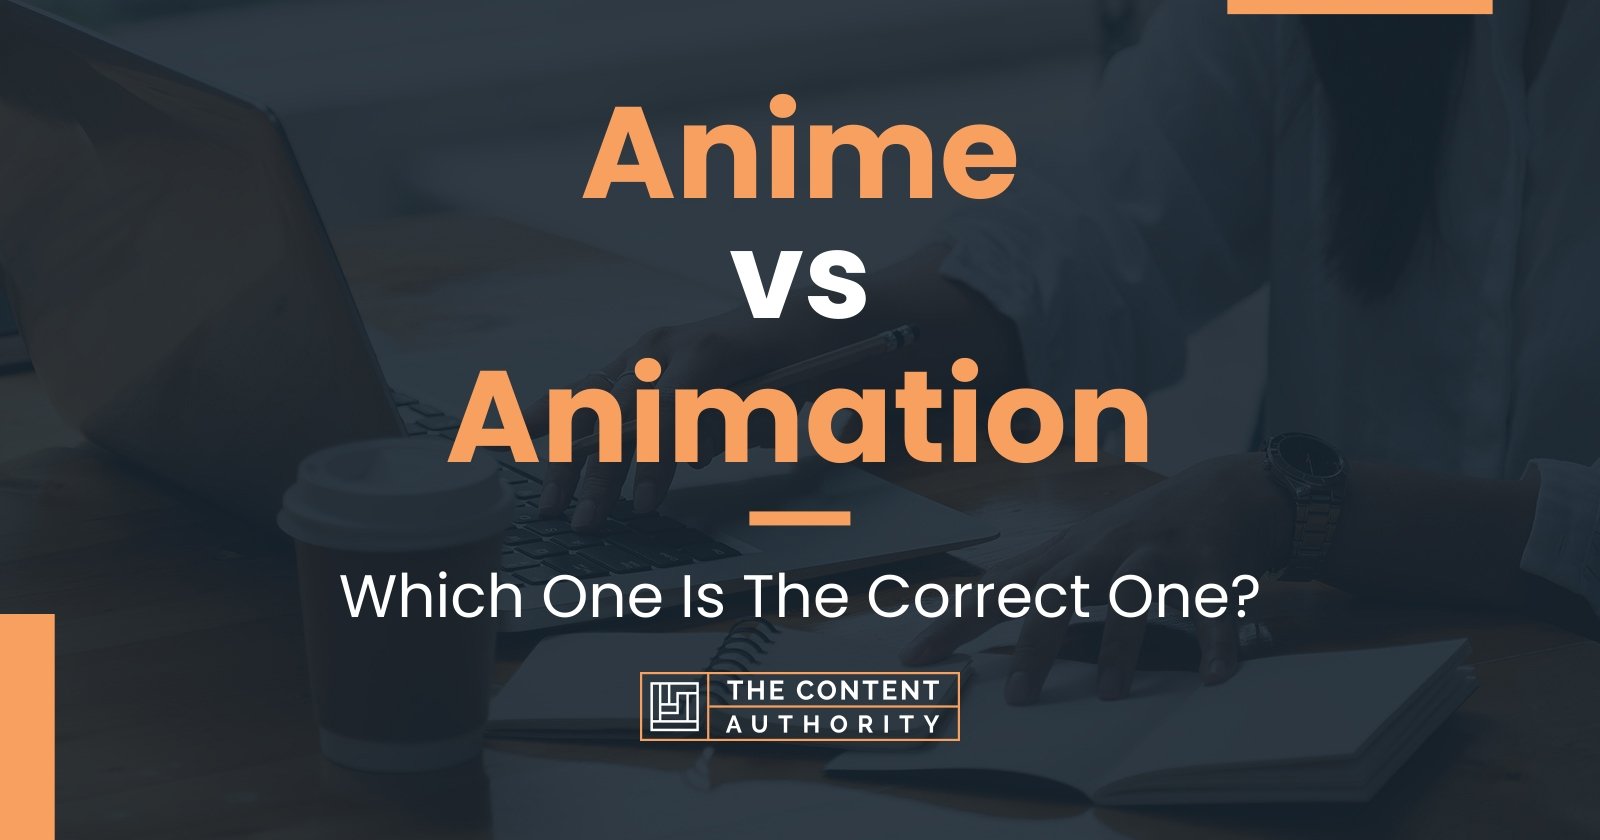 Anime vs Animation: Which One Is The Correct One?